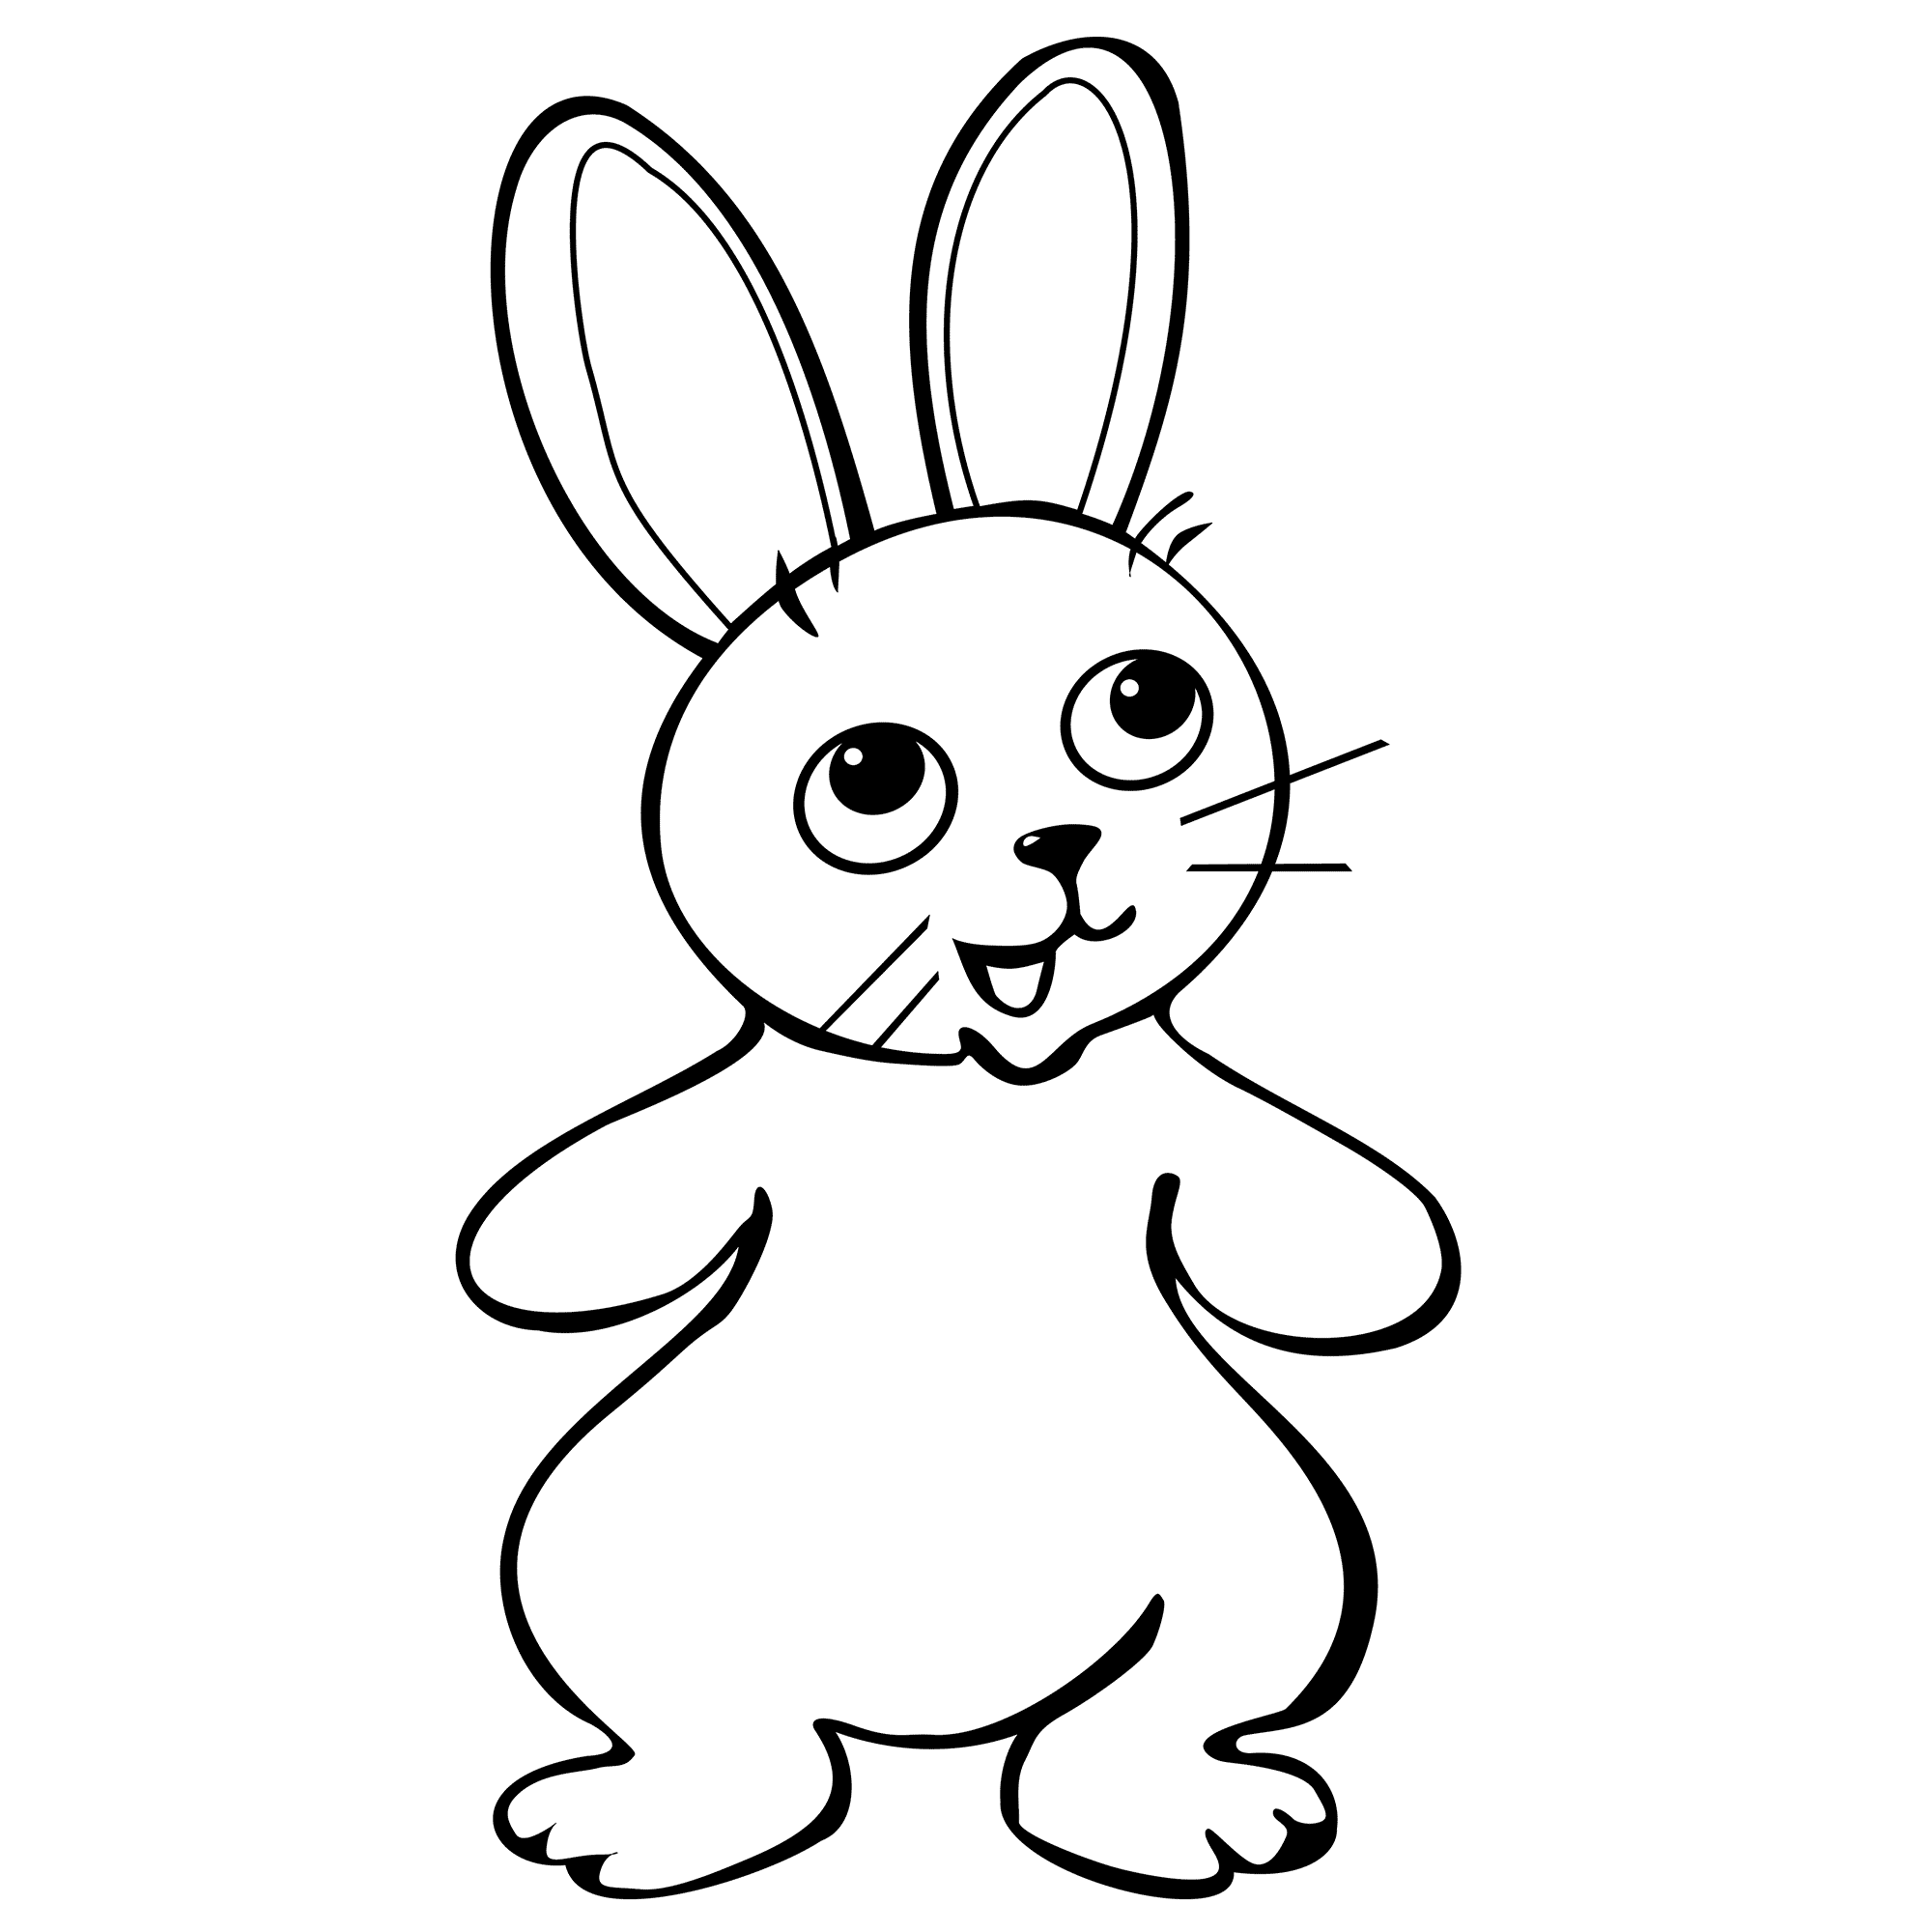 bunny coloring page bunny coloring pages best coloring pages for kids coloring page bunny 